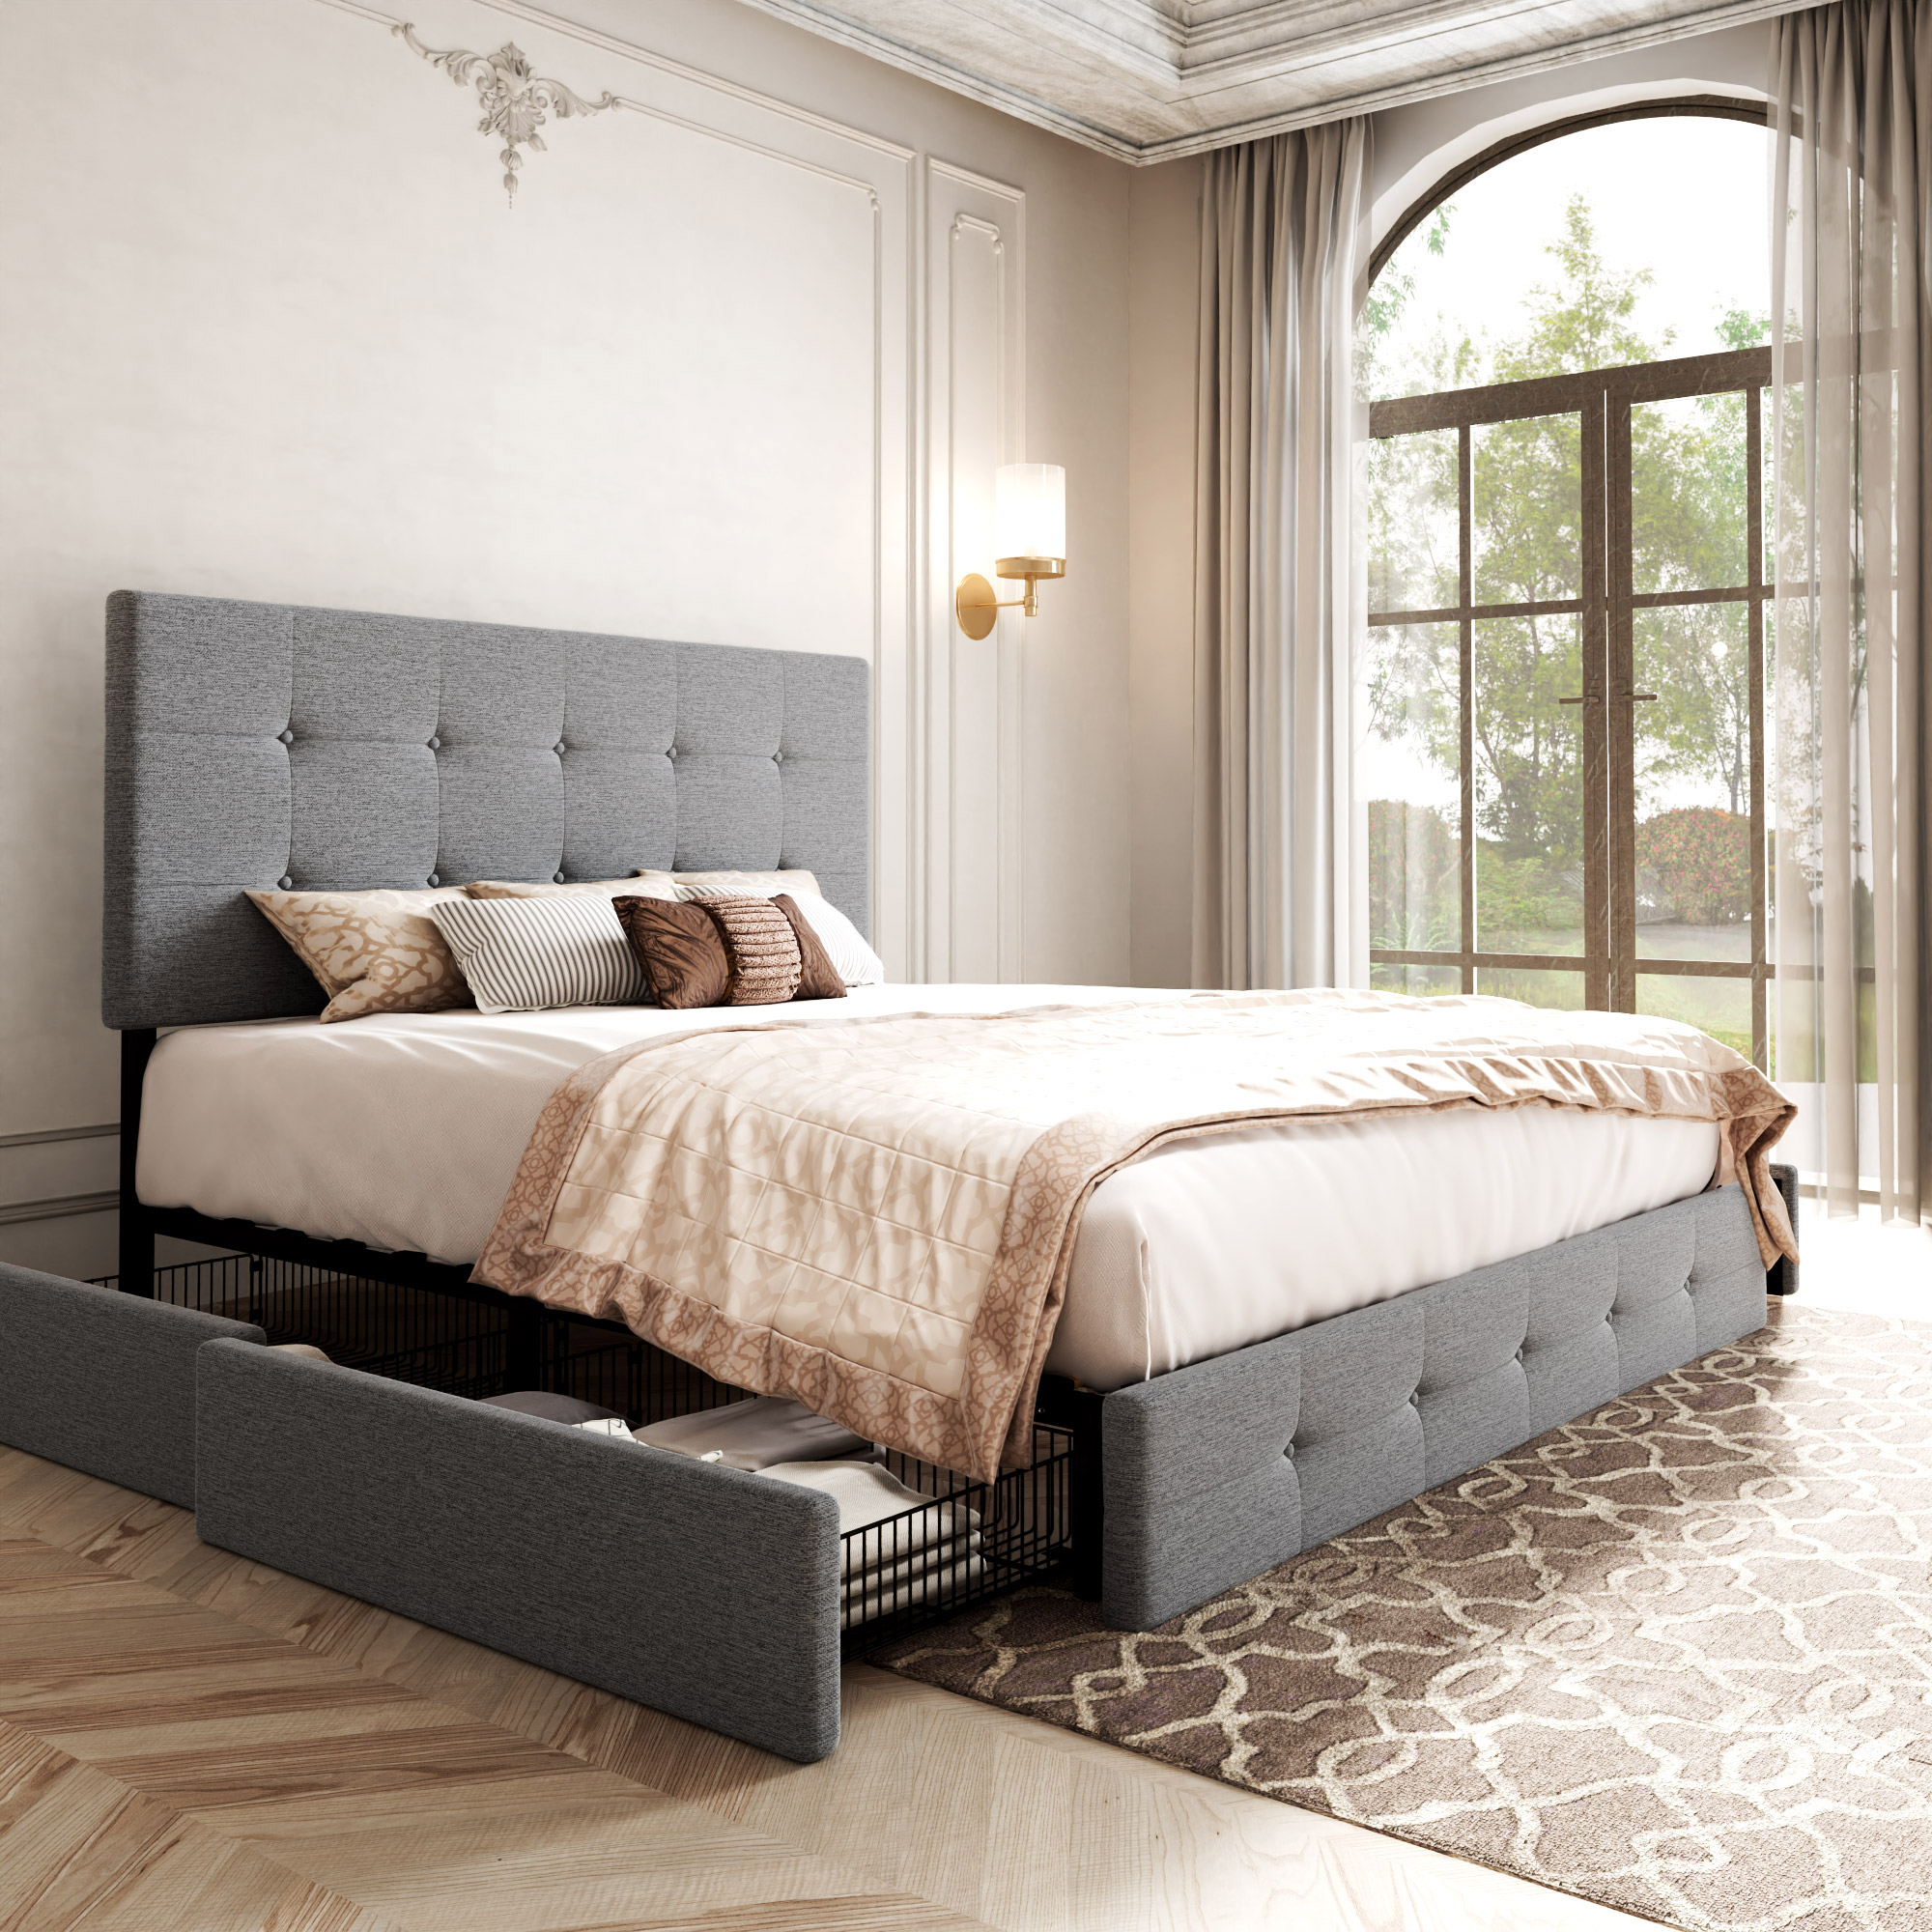 Allewie Light Grey Queen Platform Bed Frame with 4 Drawers Storage and Square Stitched Button Tufted Upholstered Headboard - image 1 of 8